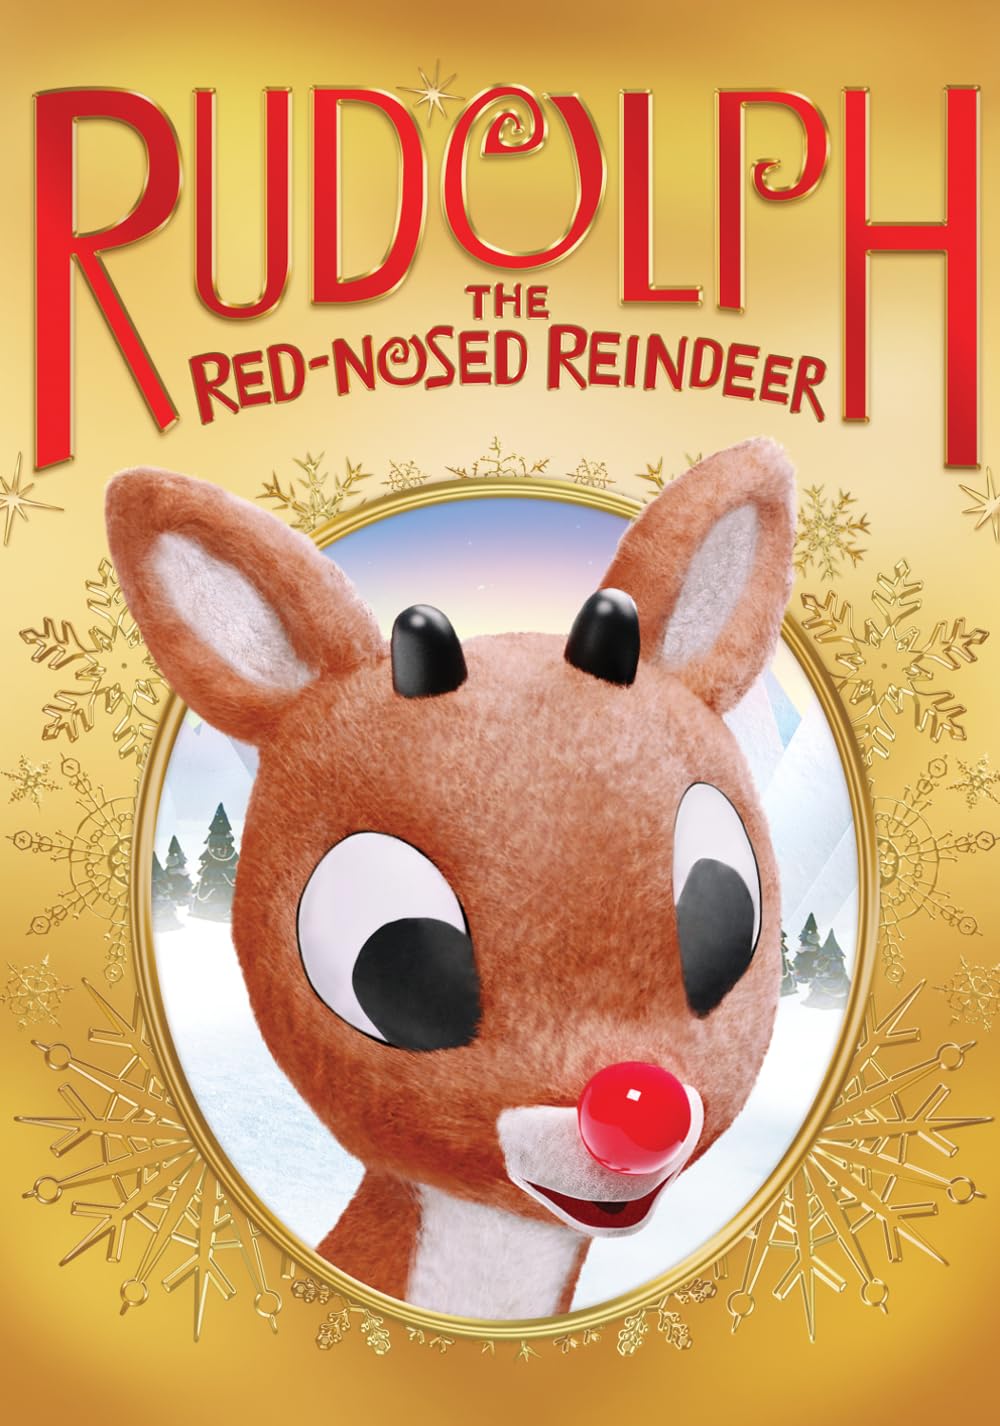 Best classic christmas movies - Rudolph the Red-Nosed Reindeer